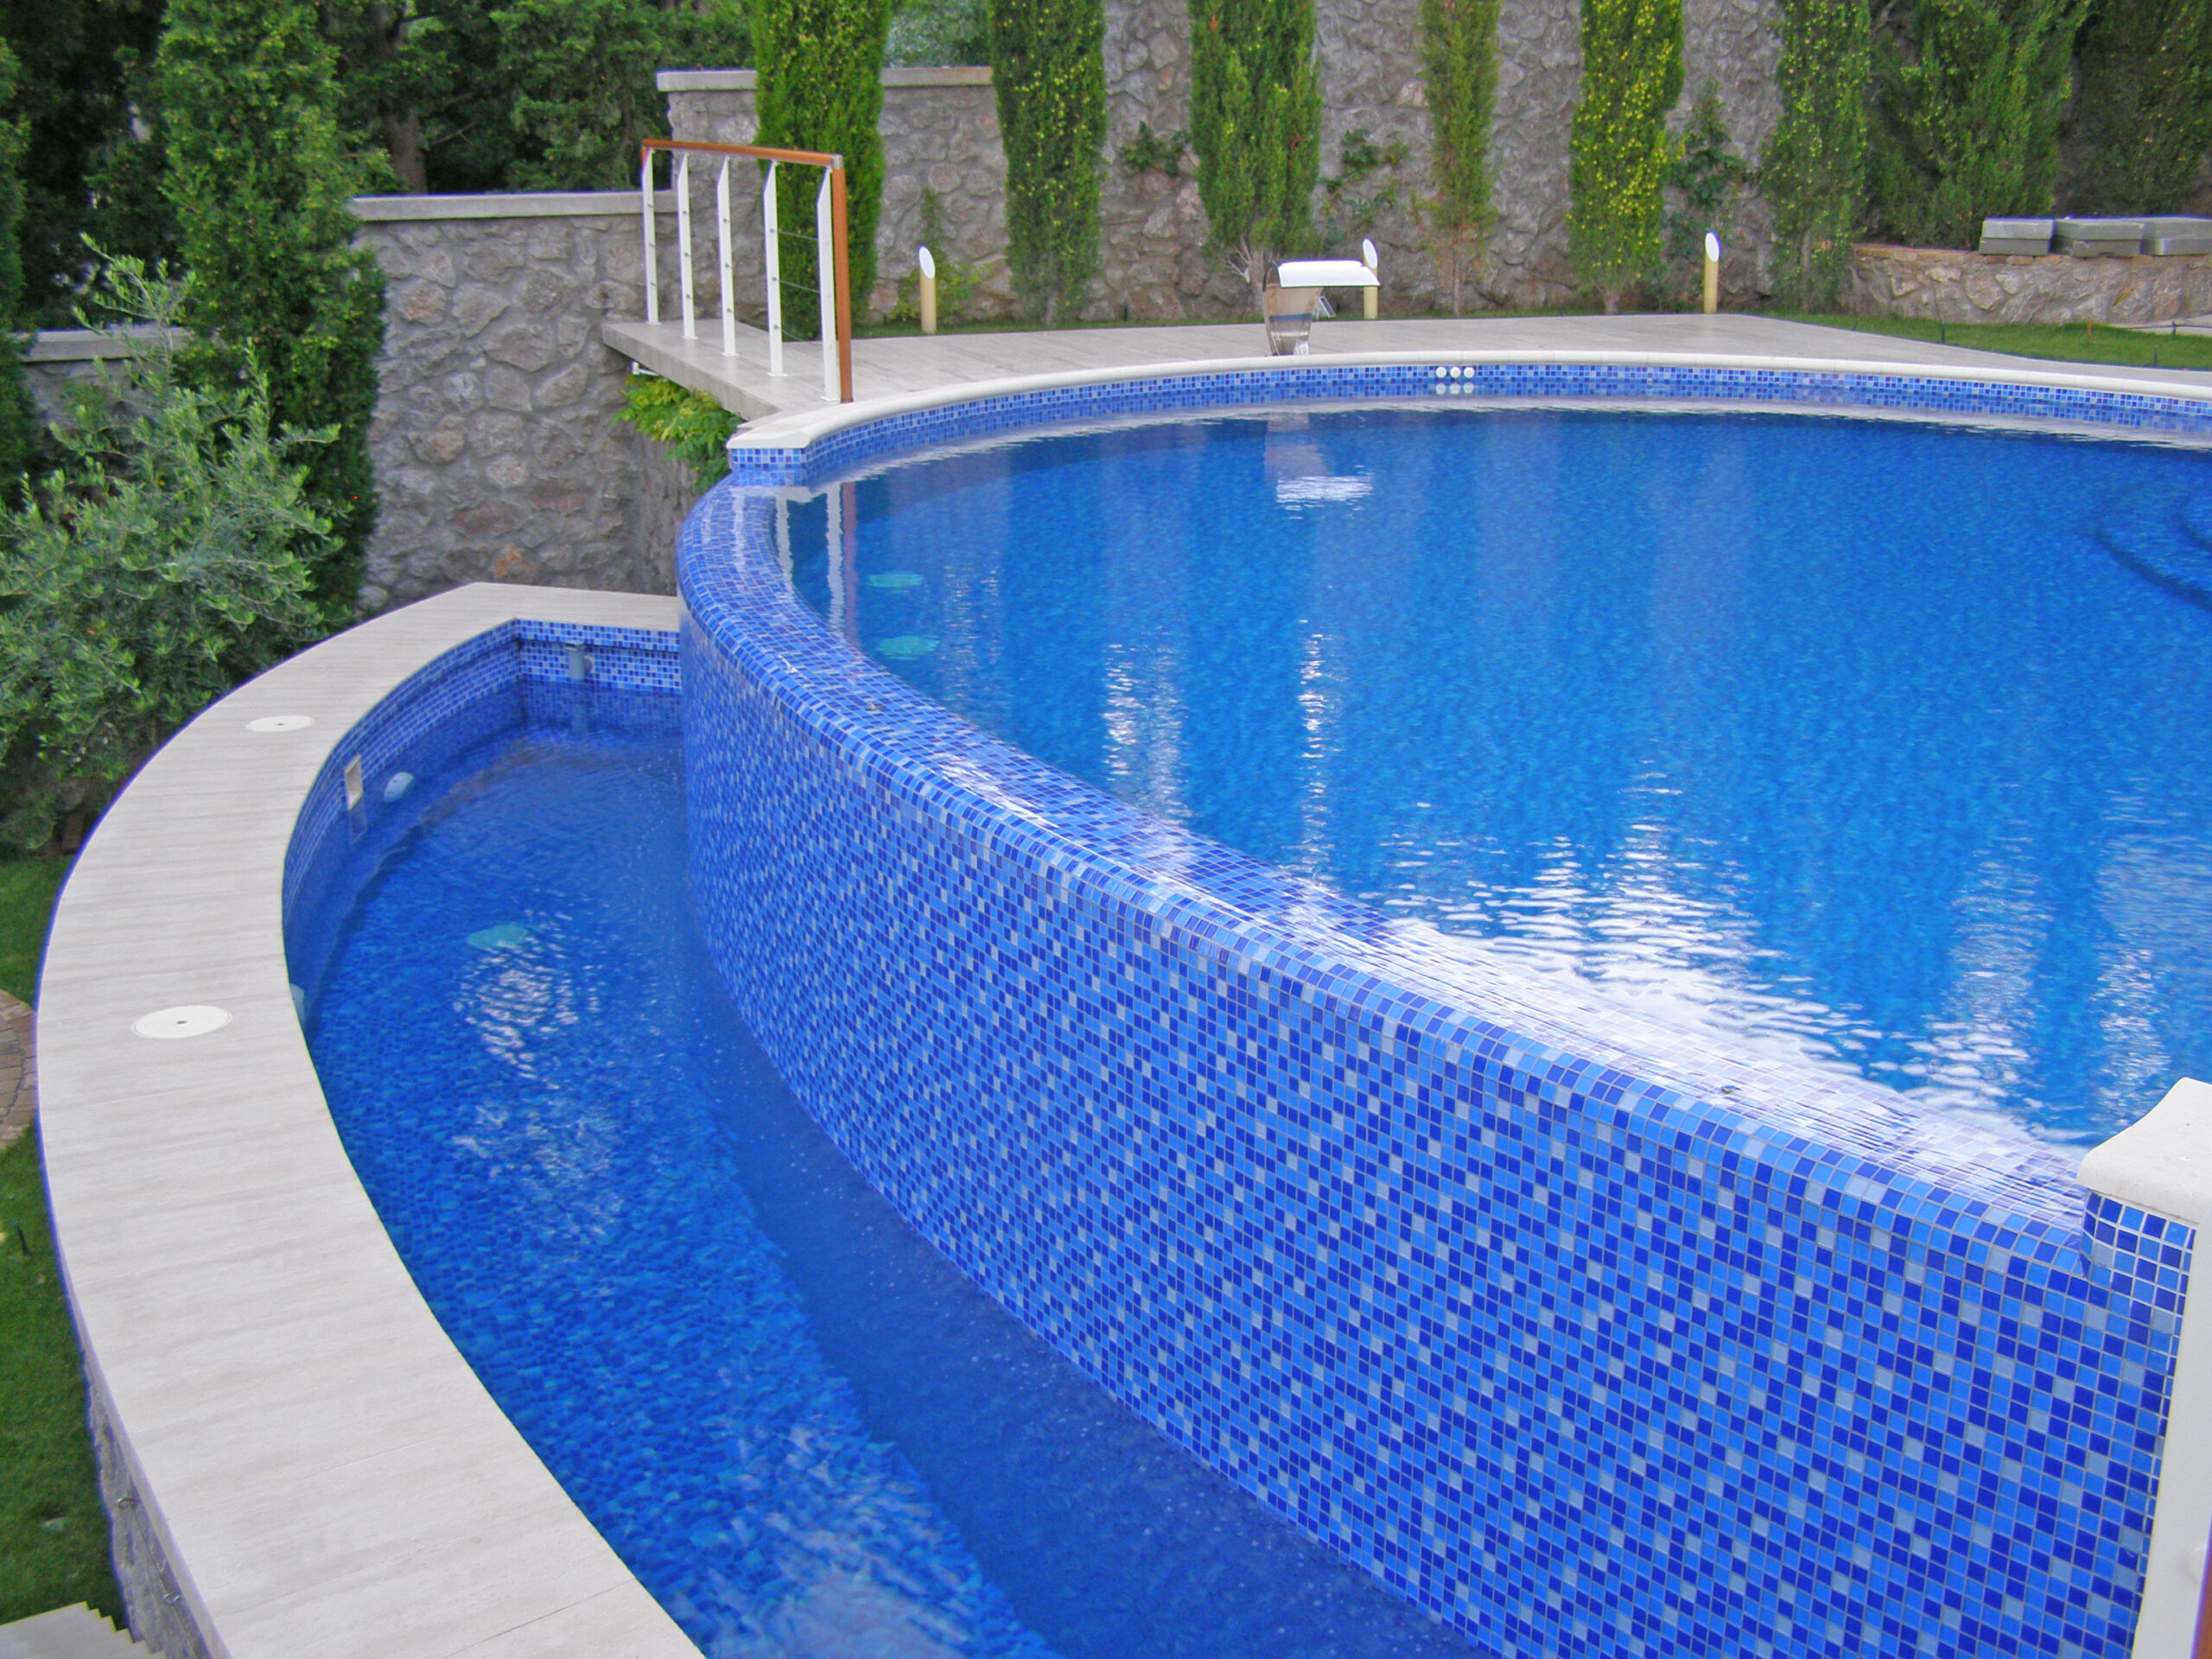 Pool coping, the protective and decorative edging material that surrounds the top perimeter of a swimming pool